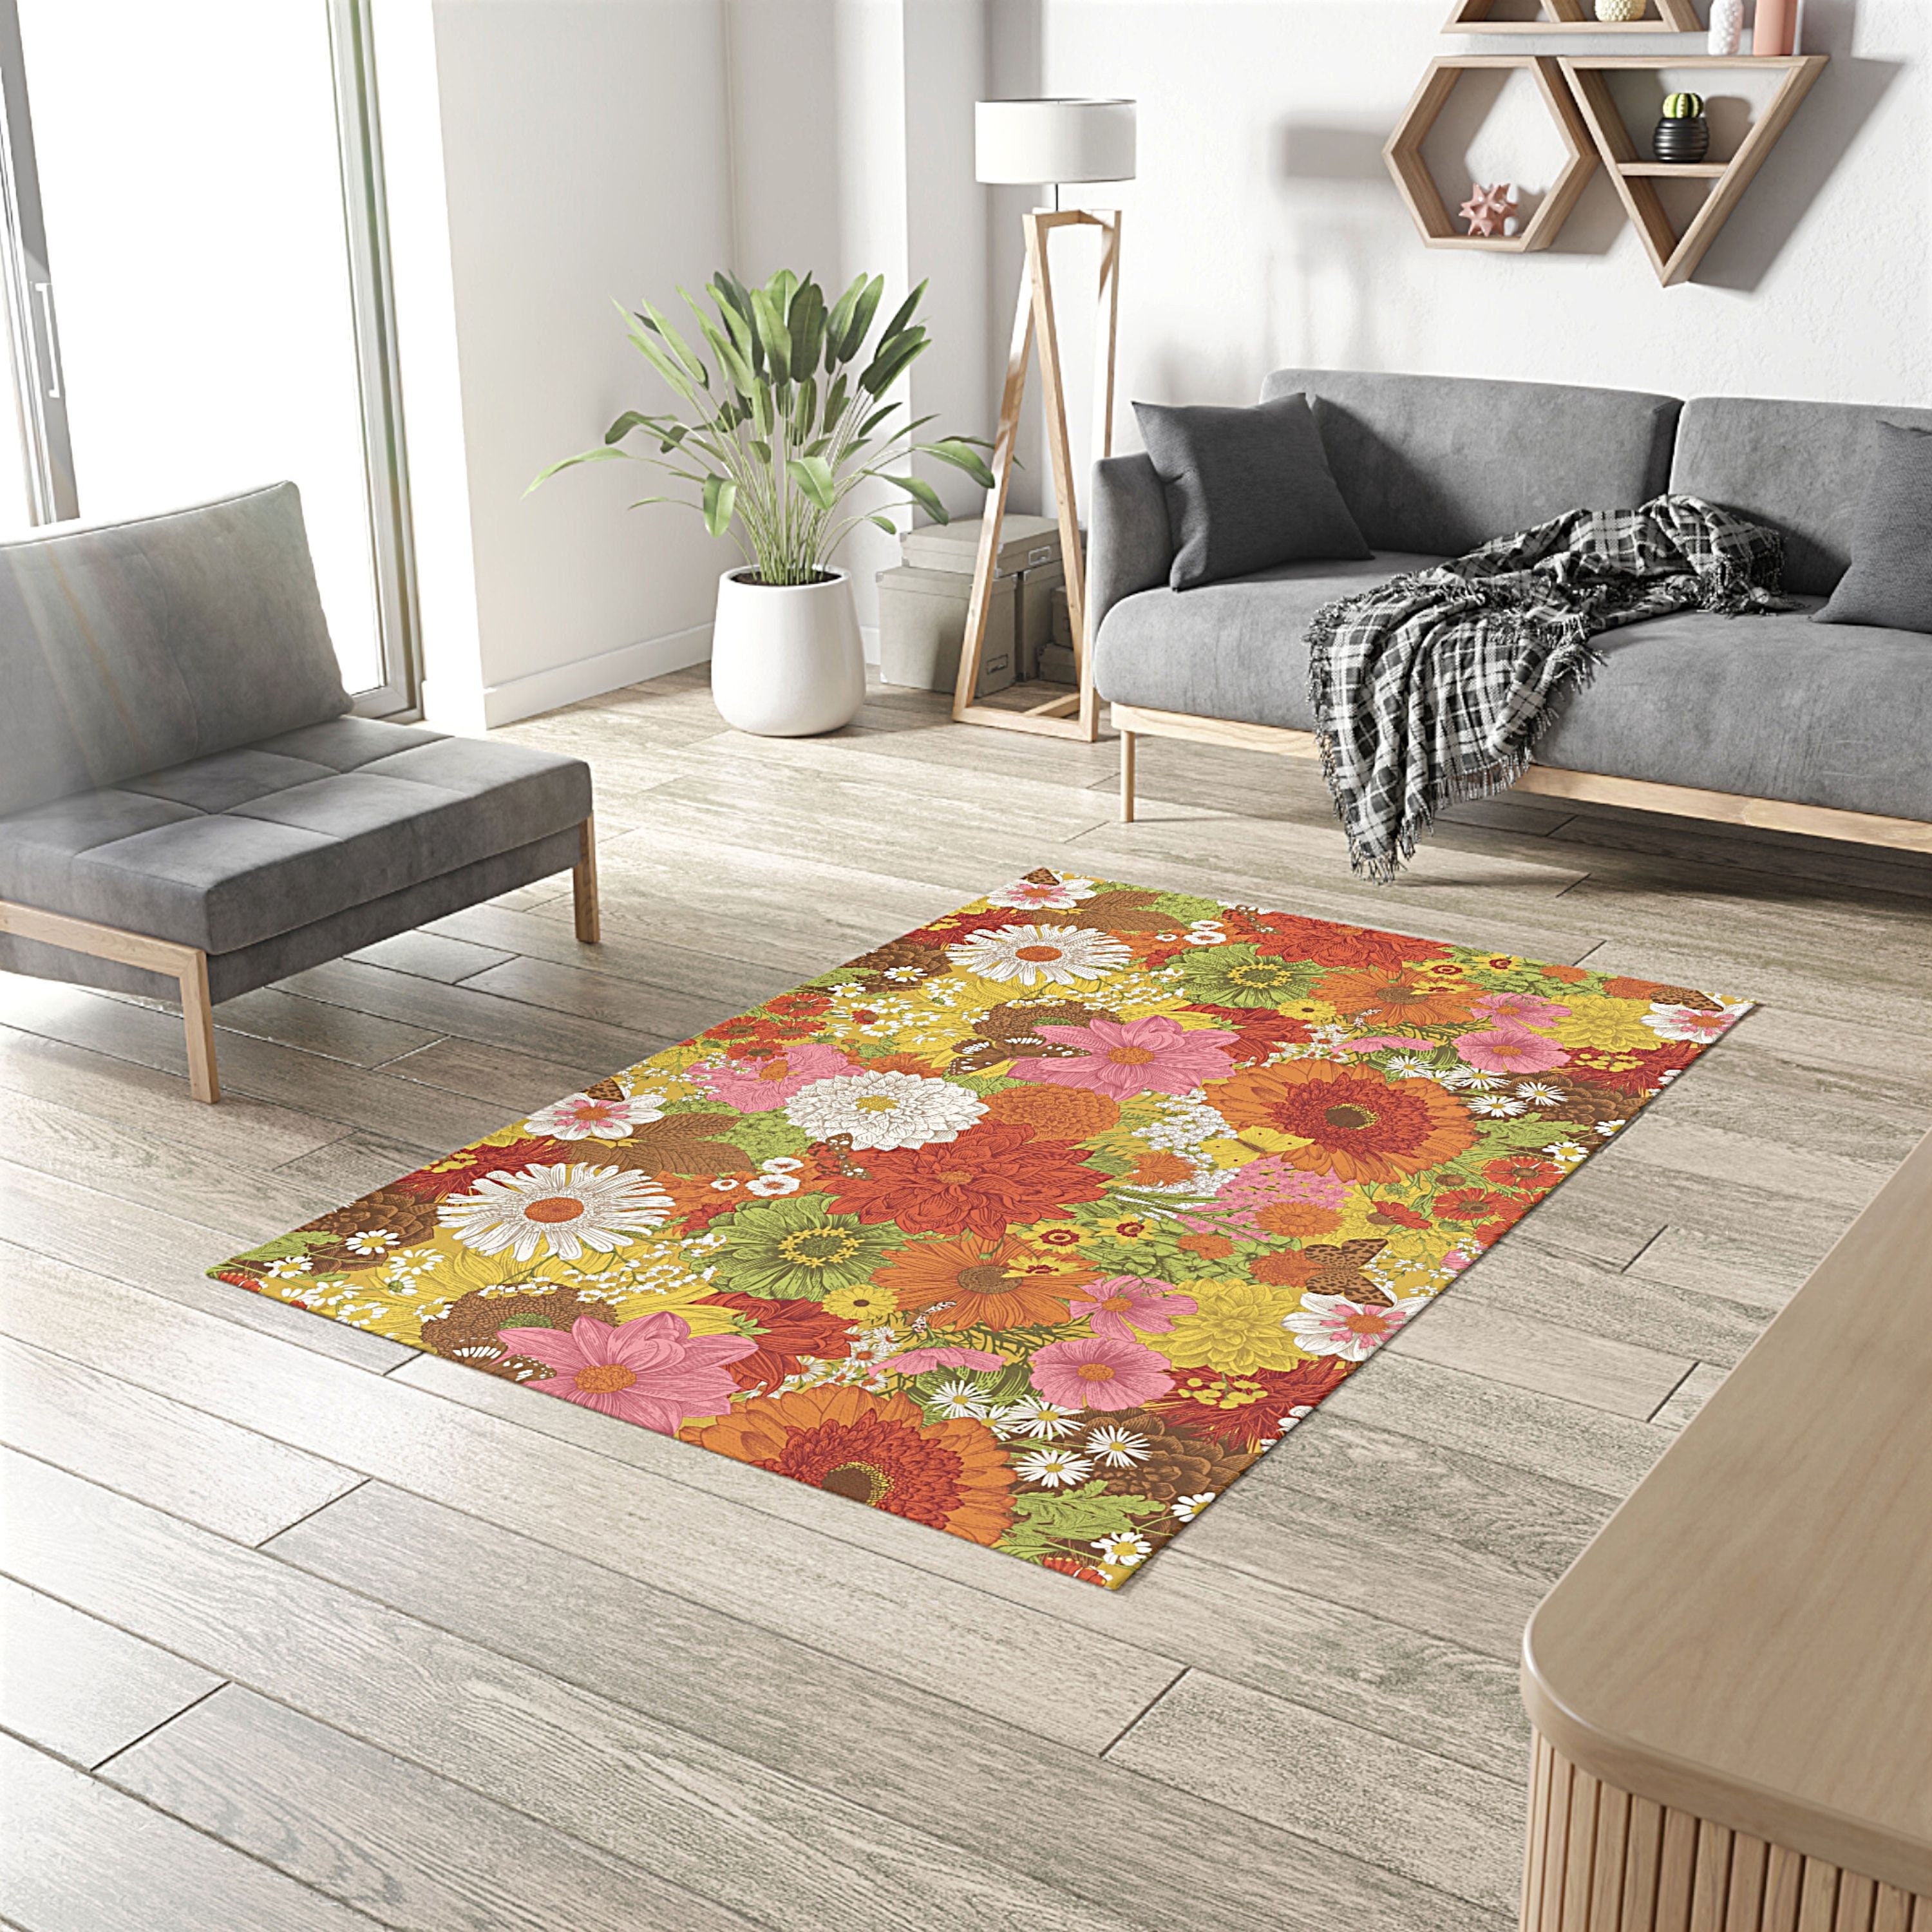 Outdoor Area Rug for Patio,Fall Watercolor Retro Floral White Camping Rugs  Indoor Large Floor Mat 5x8ft,Pastoral Vintage Flower Seamless Outside